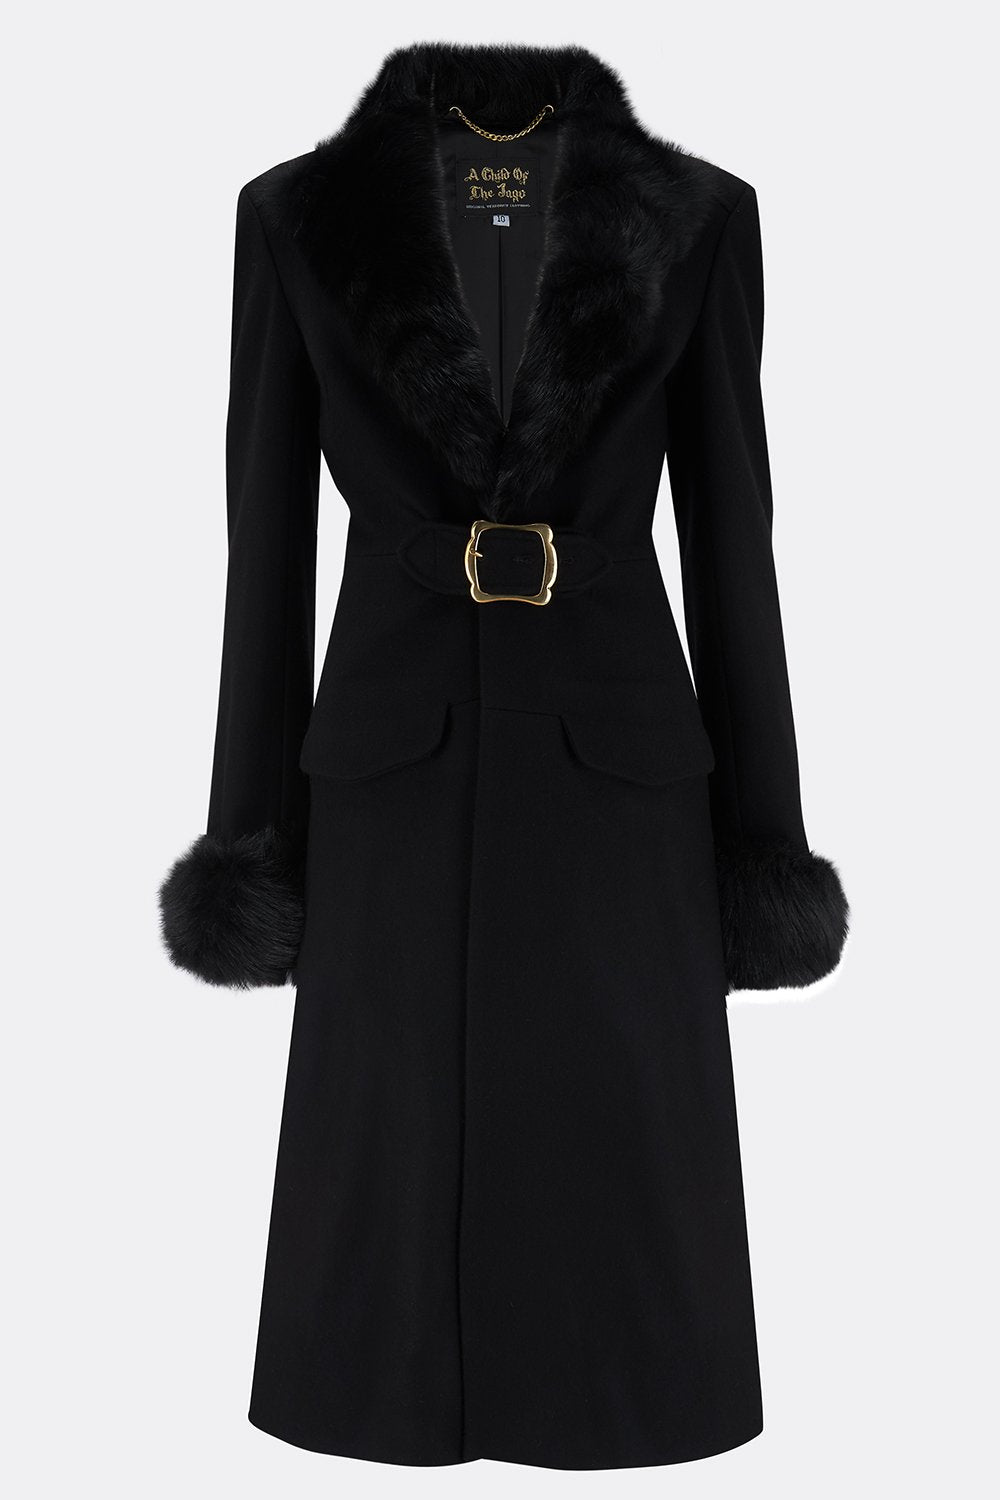 CUTPURSE COAT IN BLACK WOOL (made to order)-womenswear-A Child Of The Jago